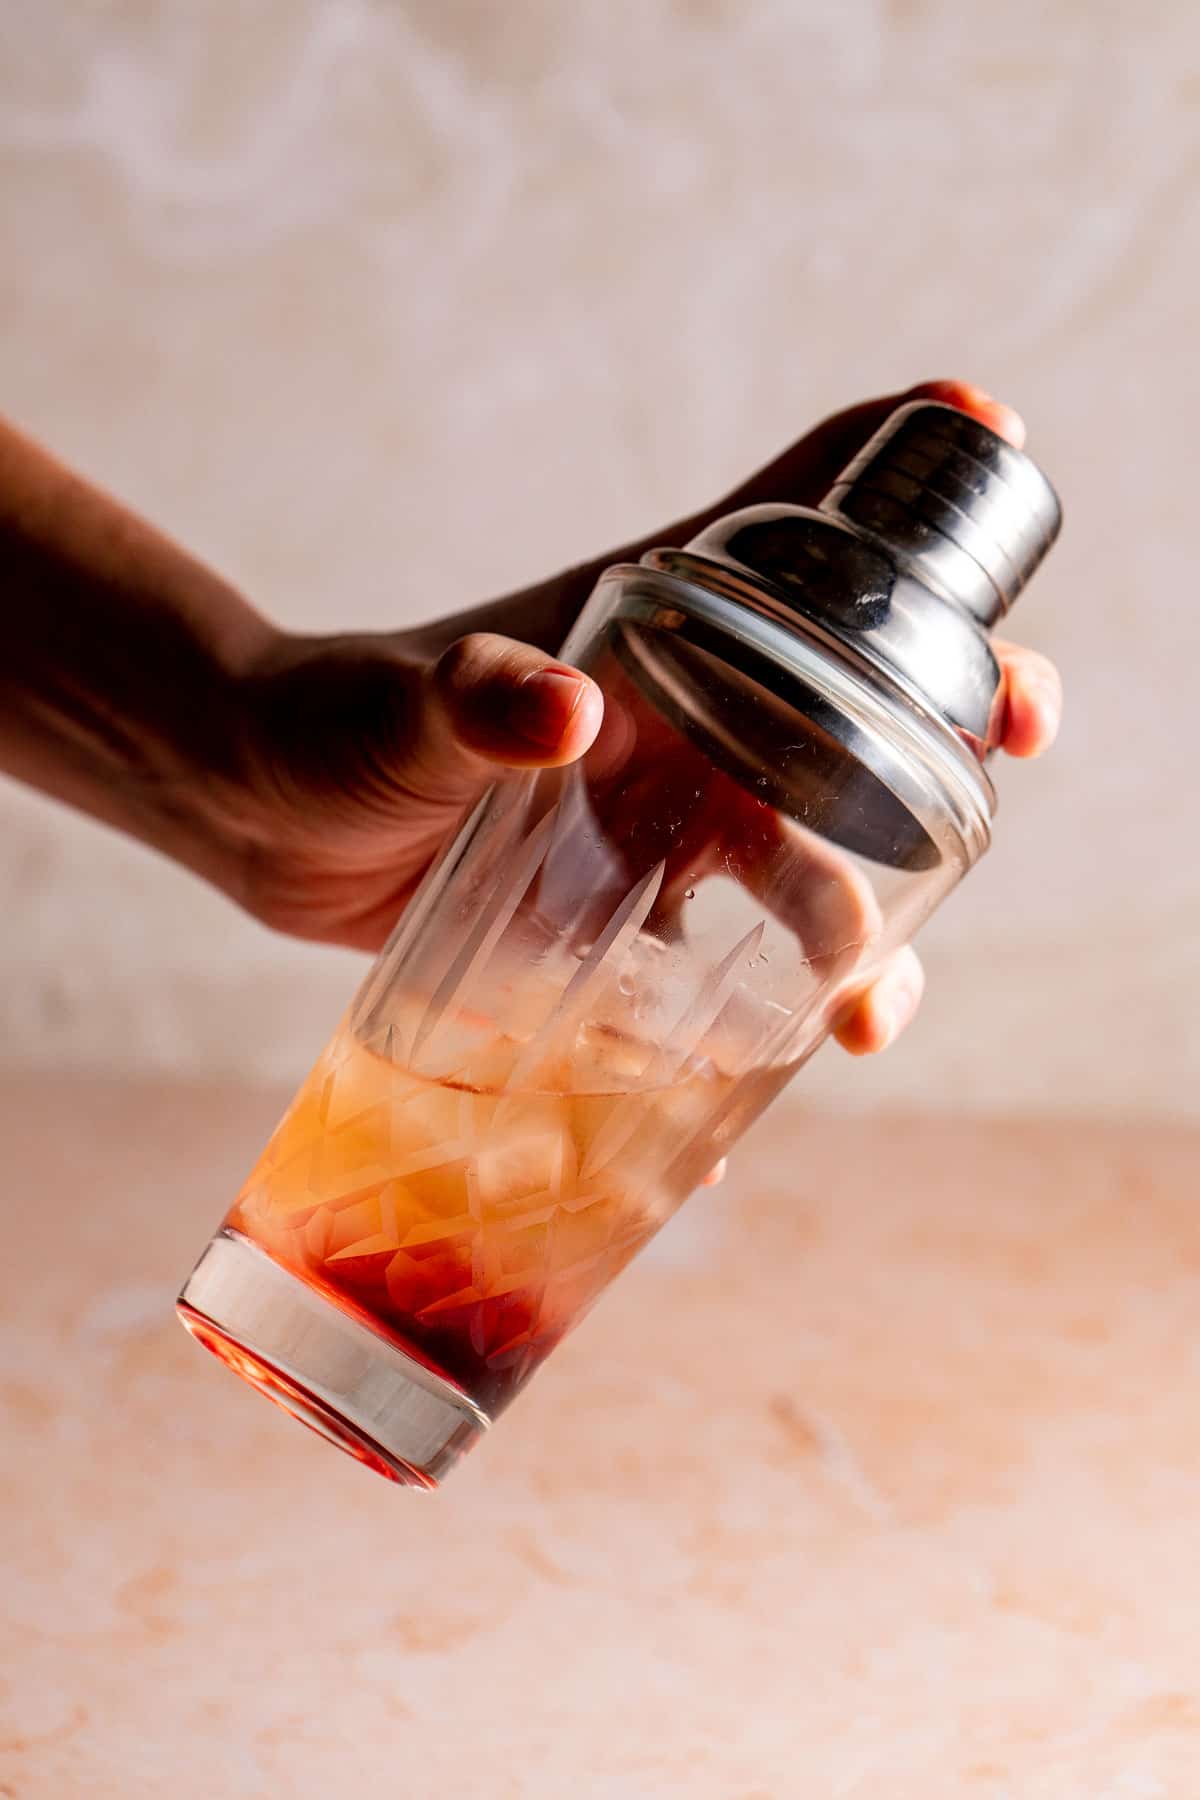 a cocktail shaker filled with ice and orange liquid.